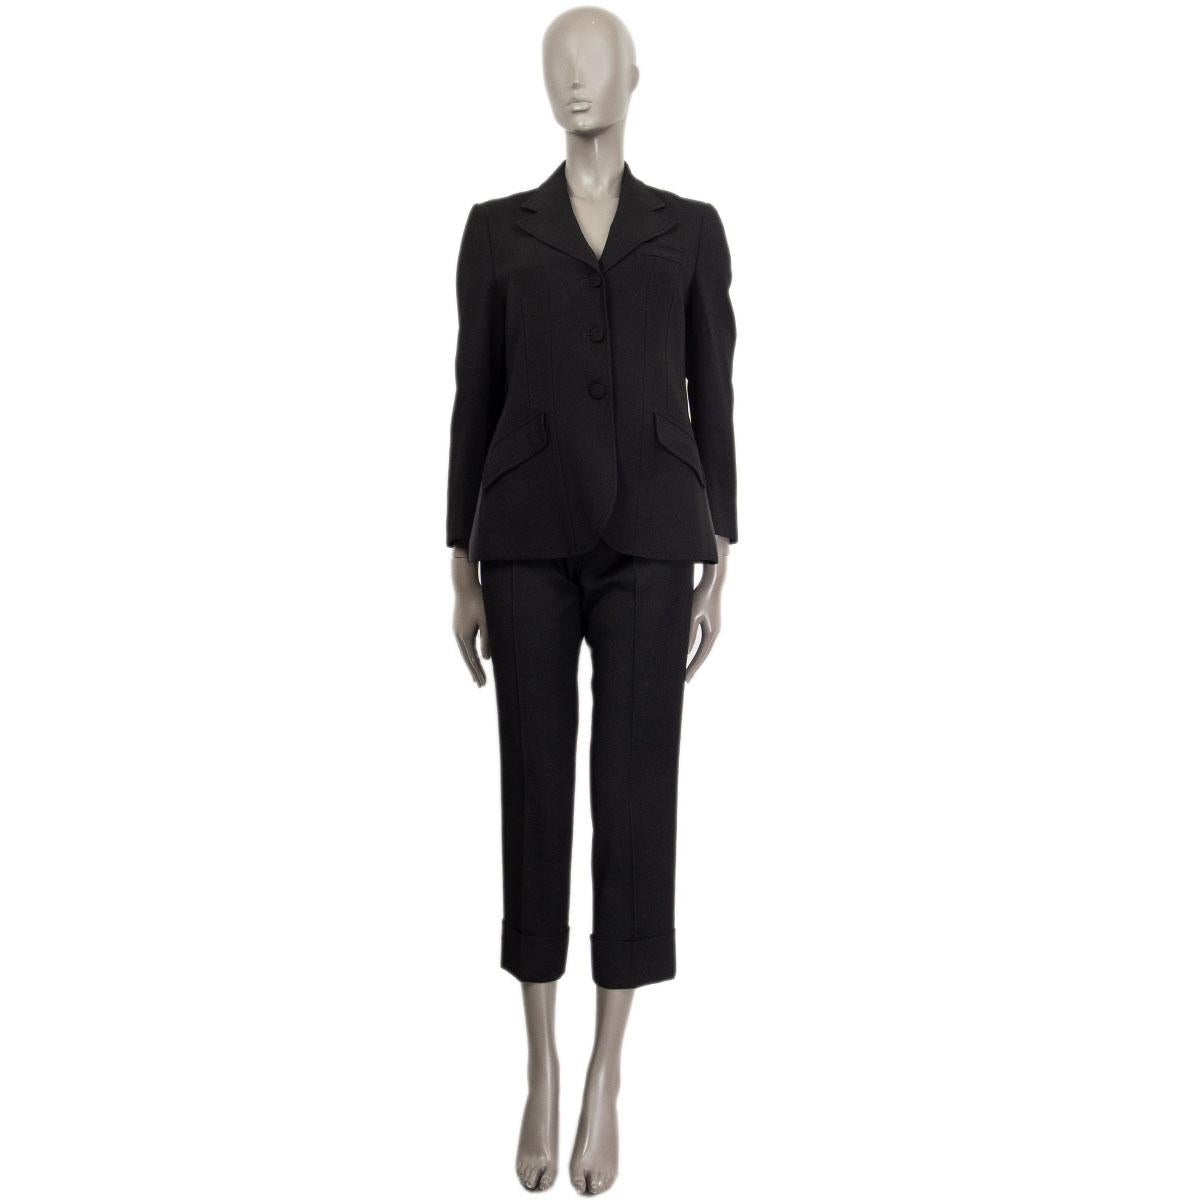 100% authentic Gucci single breasted blazer in black cady viscose (with 3% elastane) and satin inserts on the side (please note that content tag missing) with notch collar and three pockets on the front. Closes with one button at the neck-line and